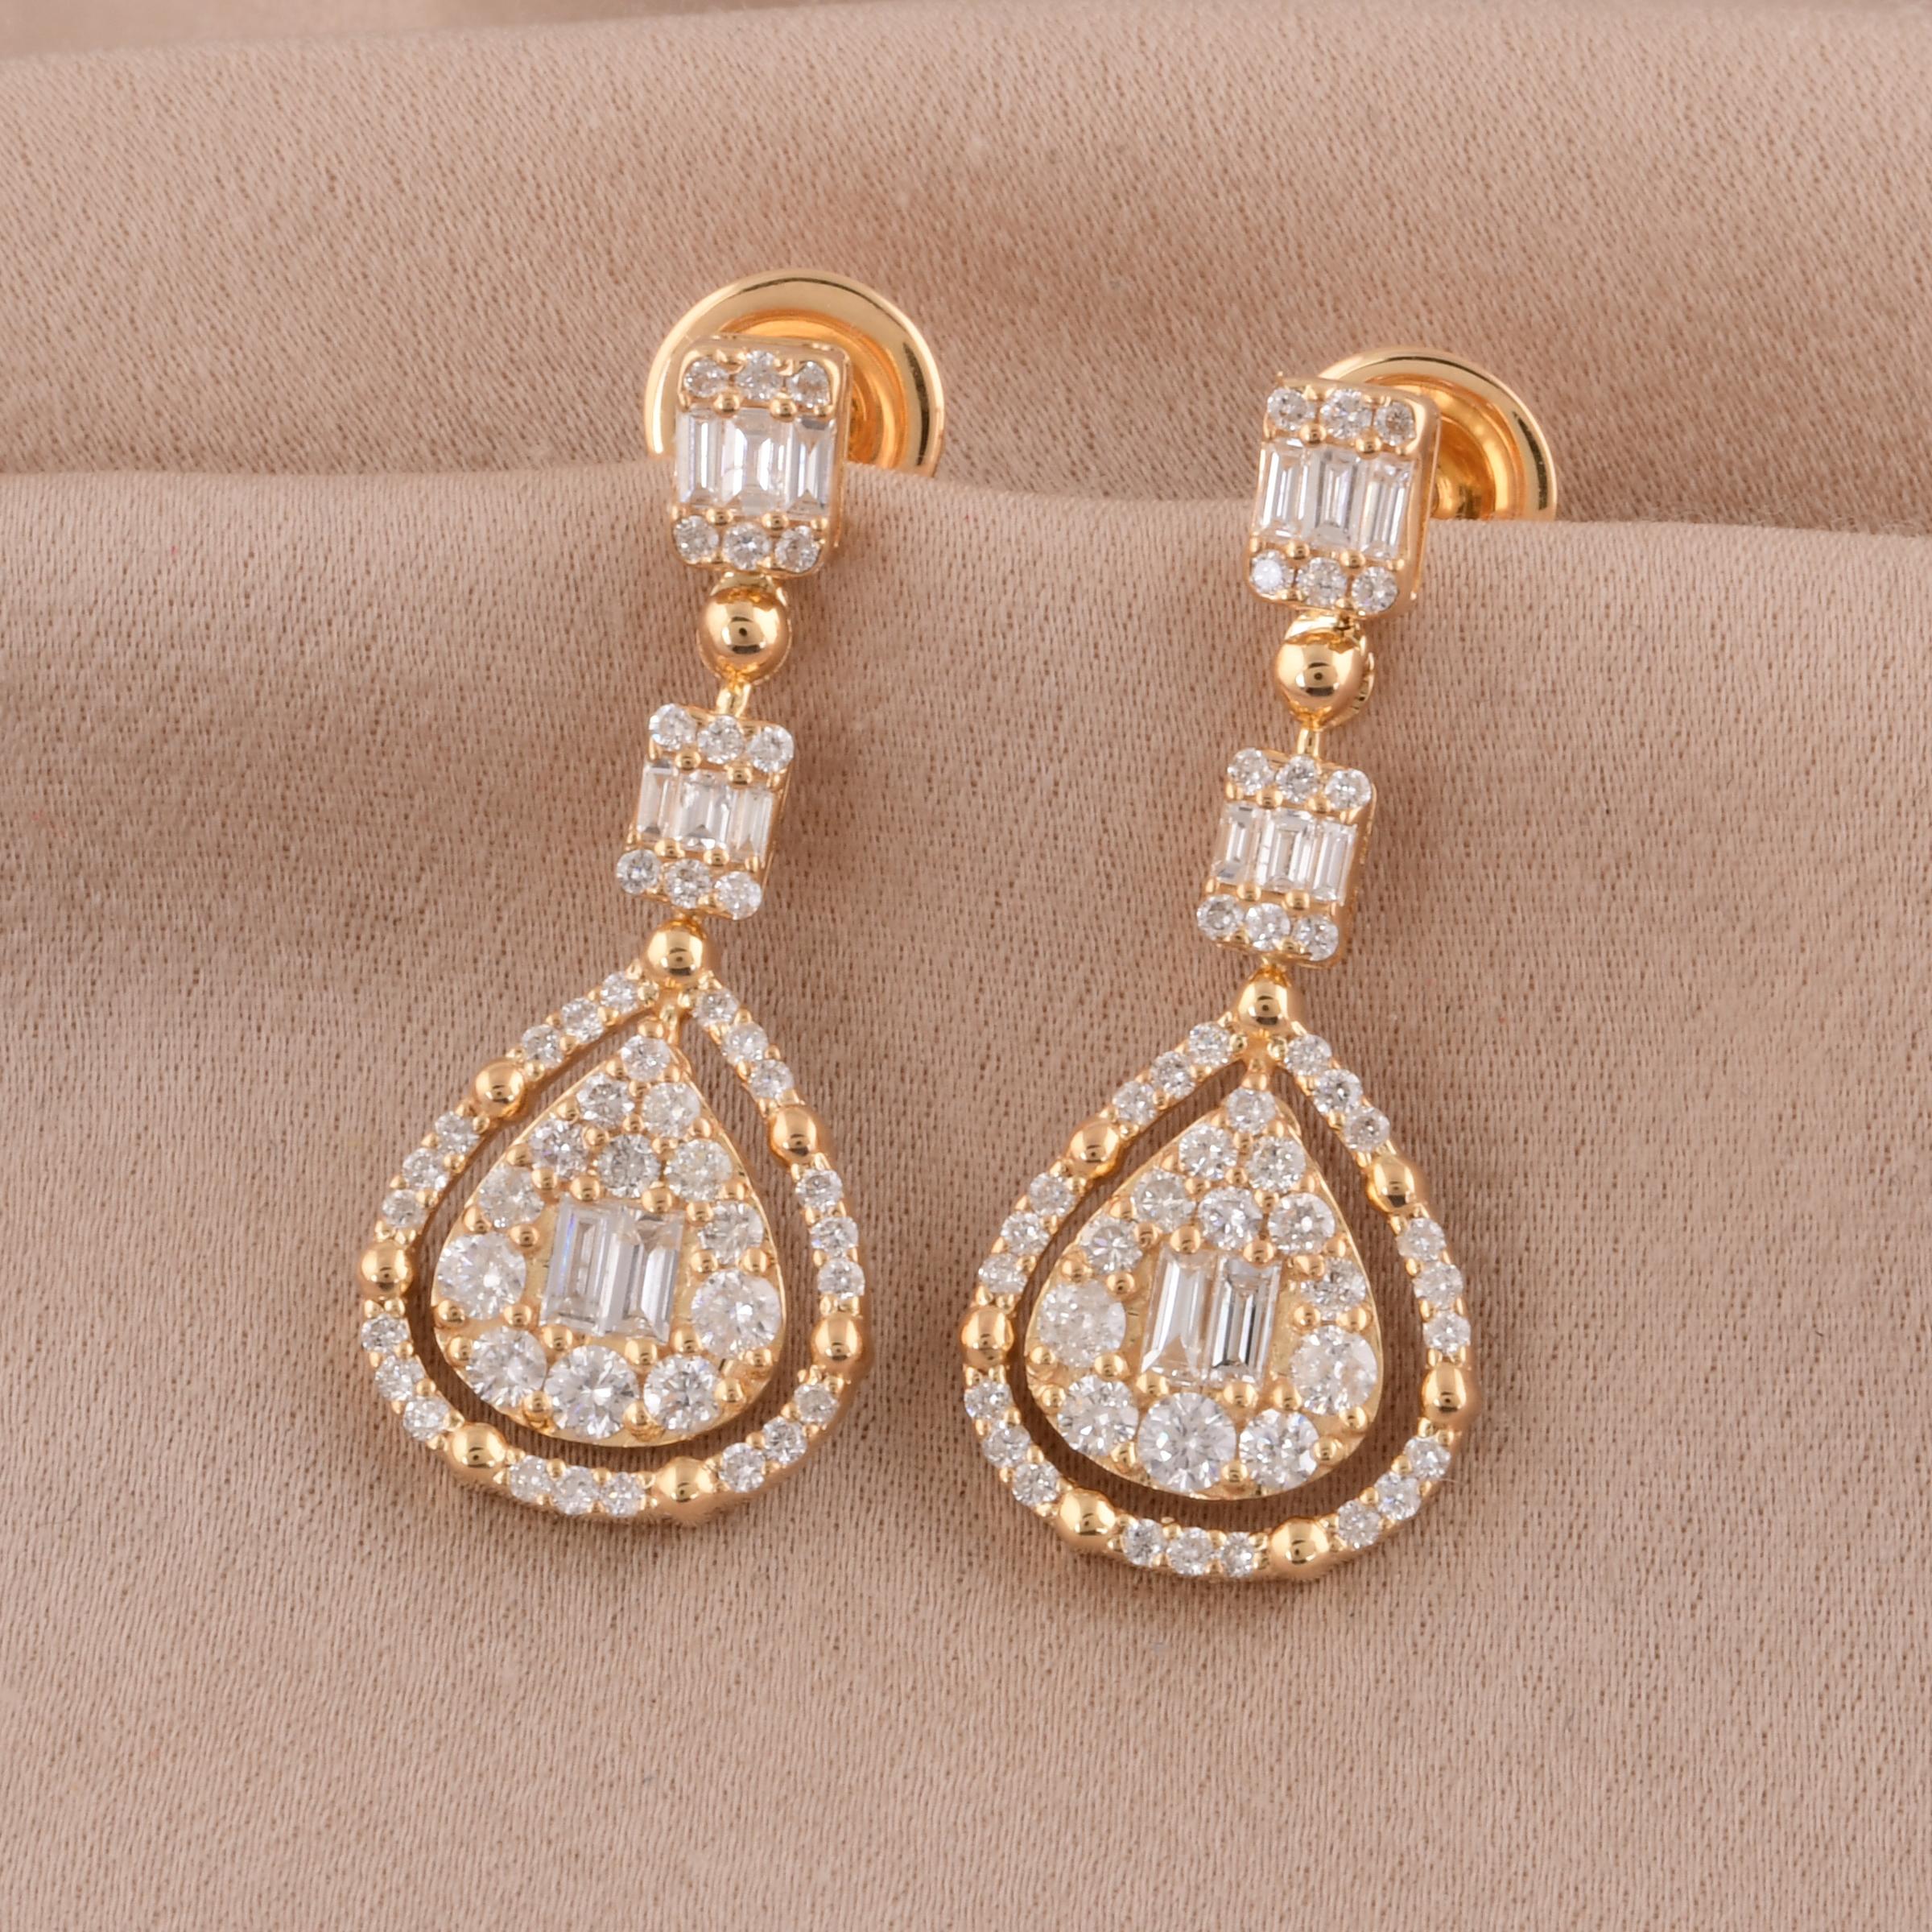 Women's Natural 1.2 Carat Baguette Diamond Dangle Earrings Solid 10k Yellow Gold Jewelry For Sale